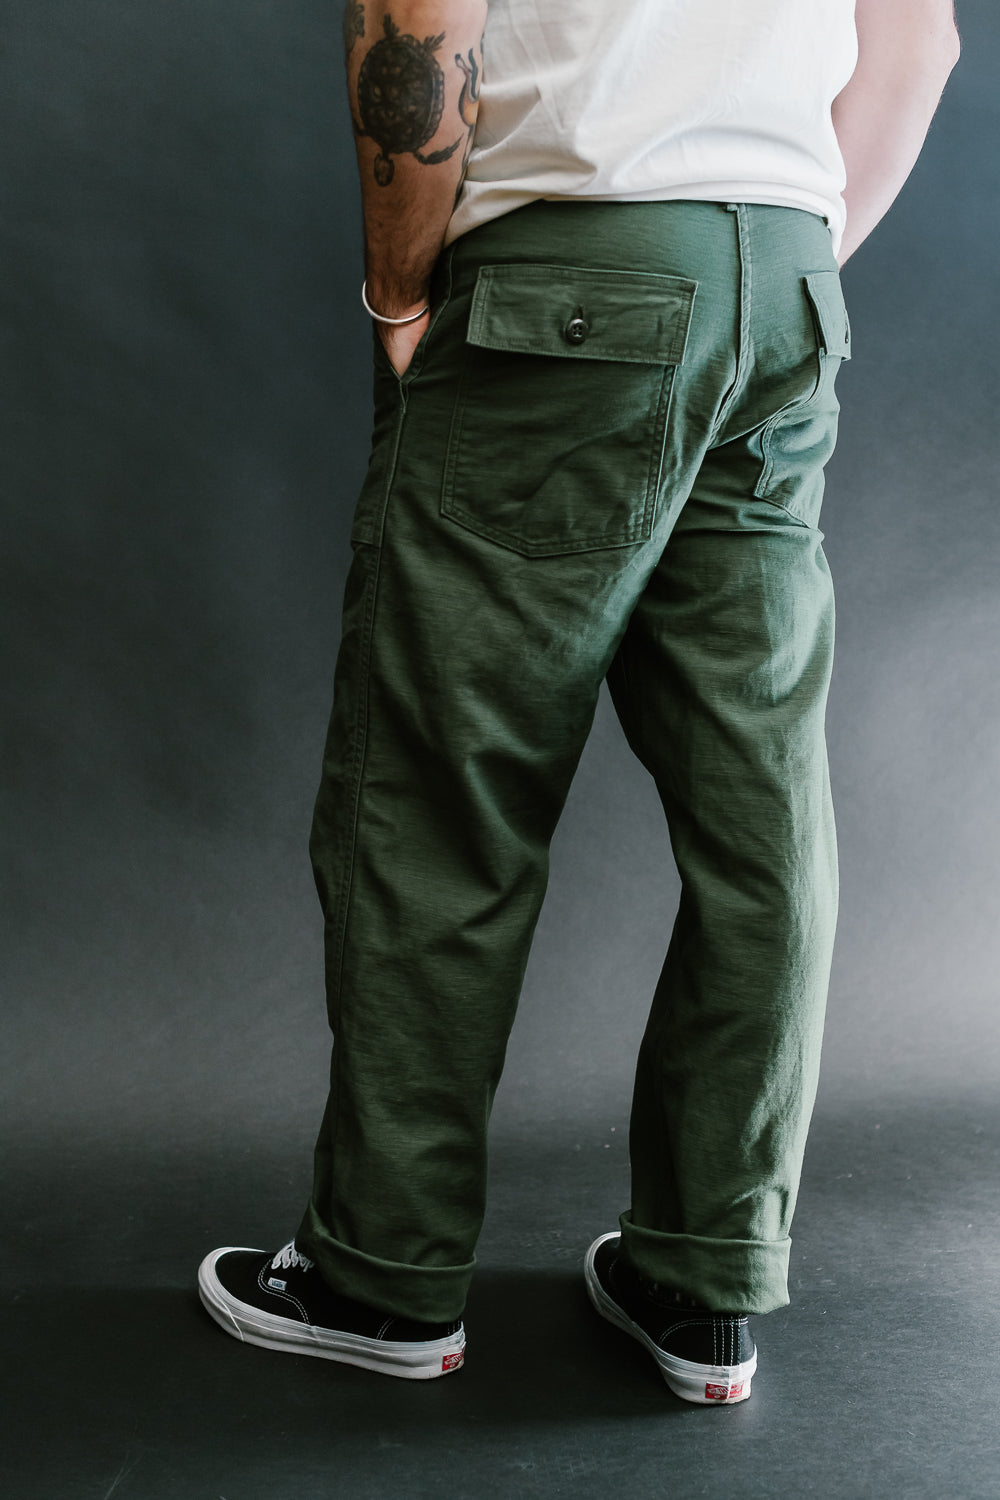 OrSlow US Army Regular Fit Fatigue Pants - Green Reverse Cotton Sateen